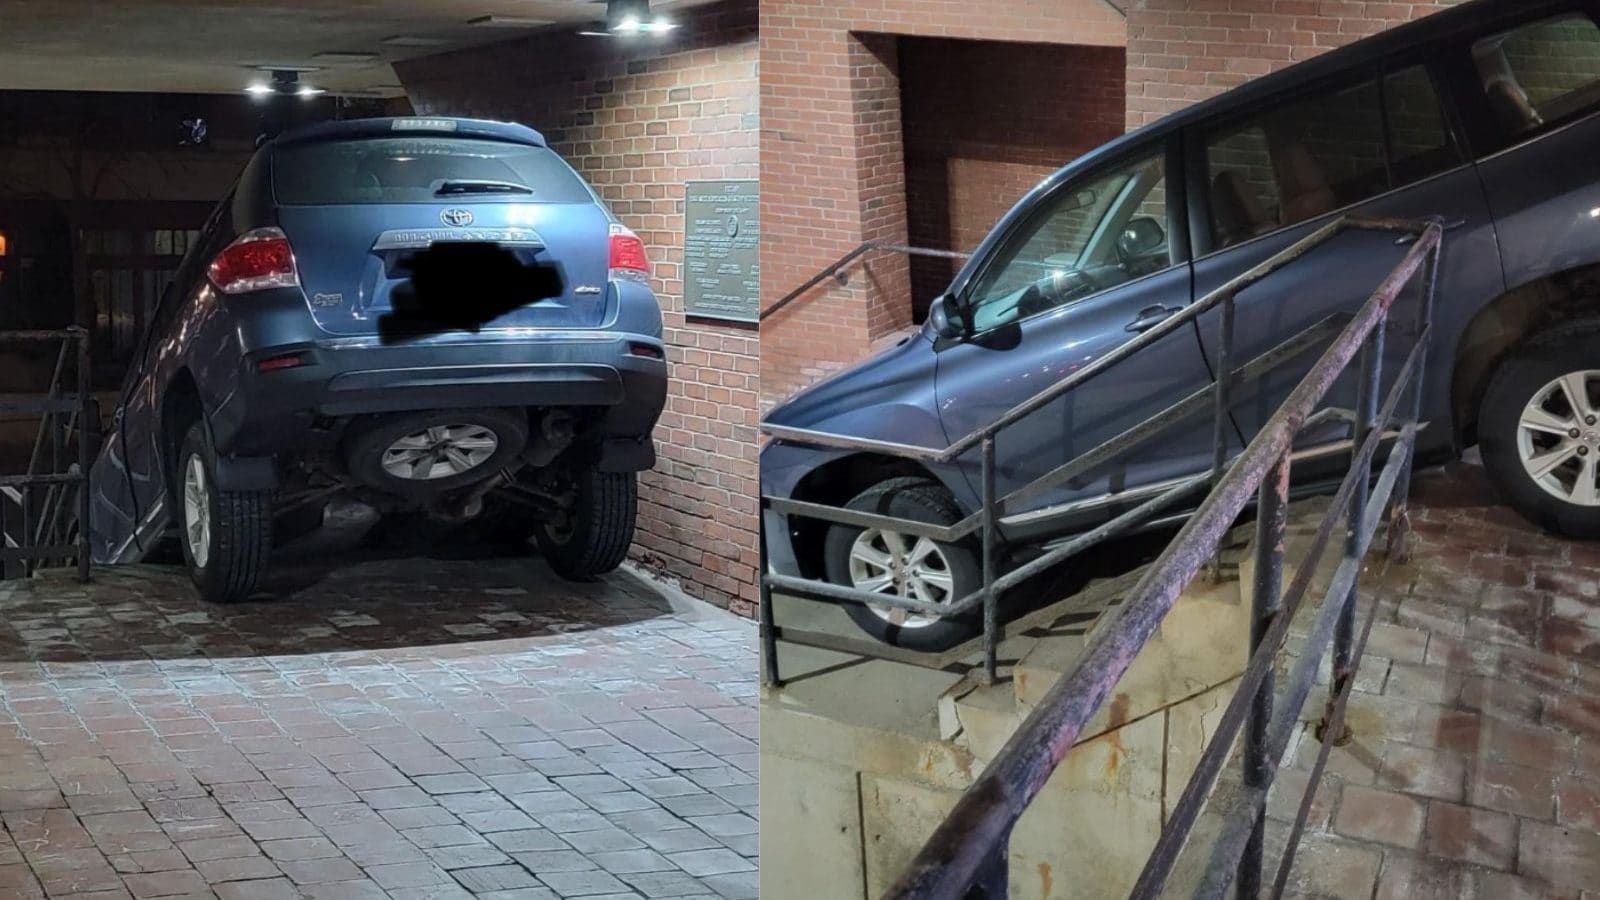 Photos of the SUV stuck on a flight of stairs